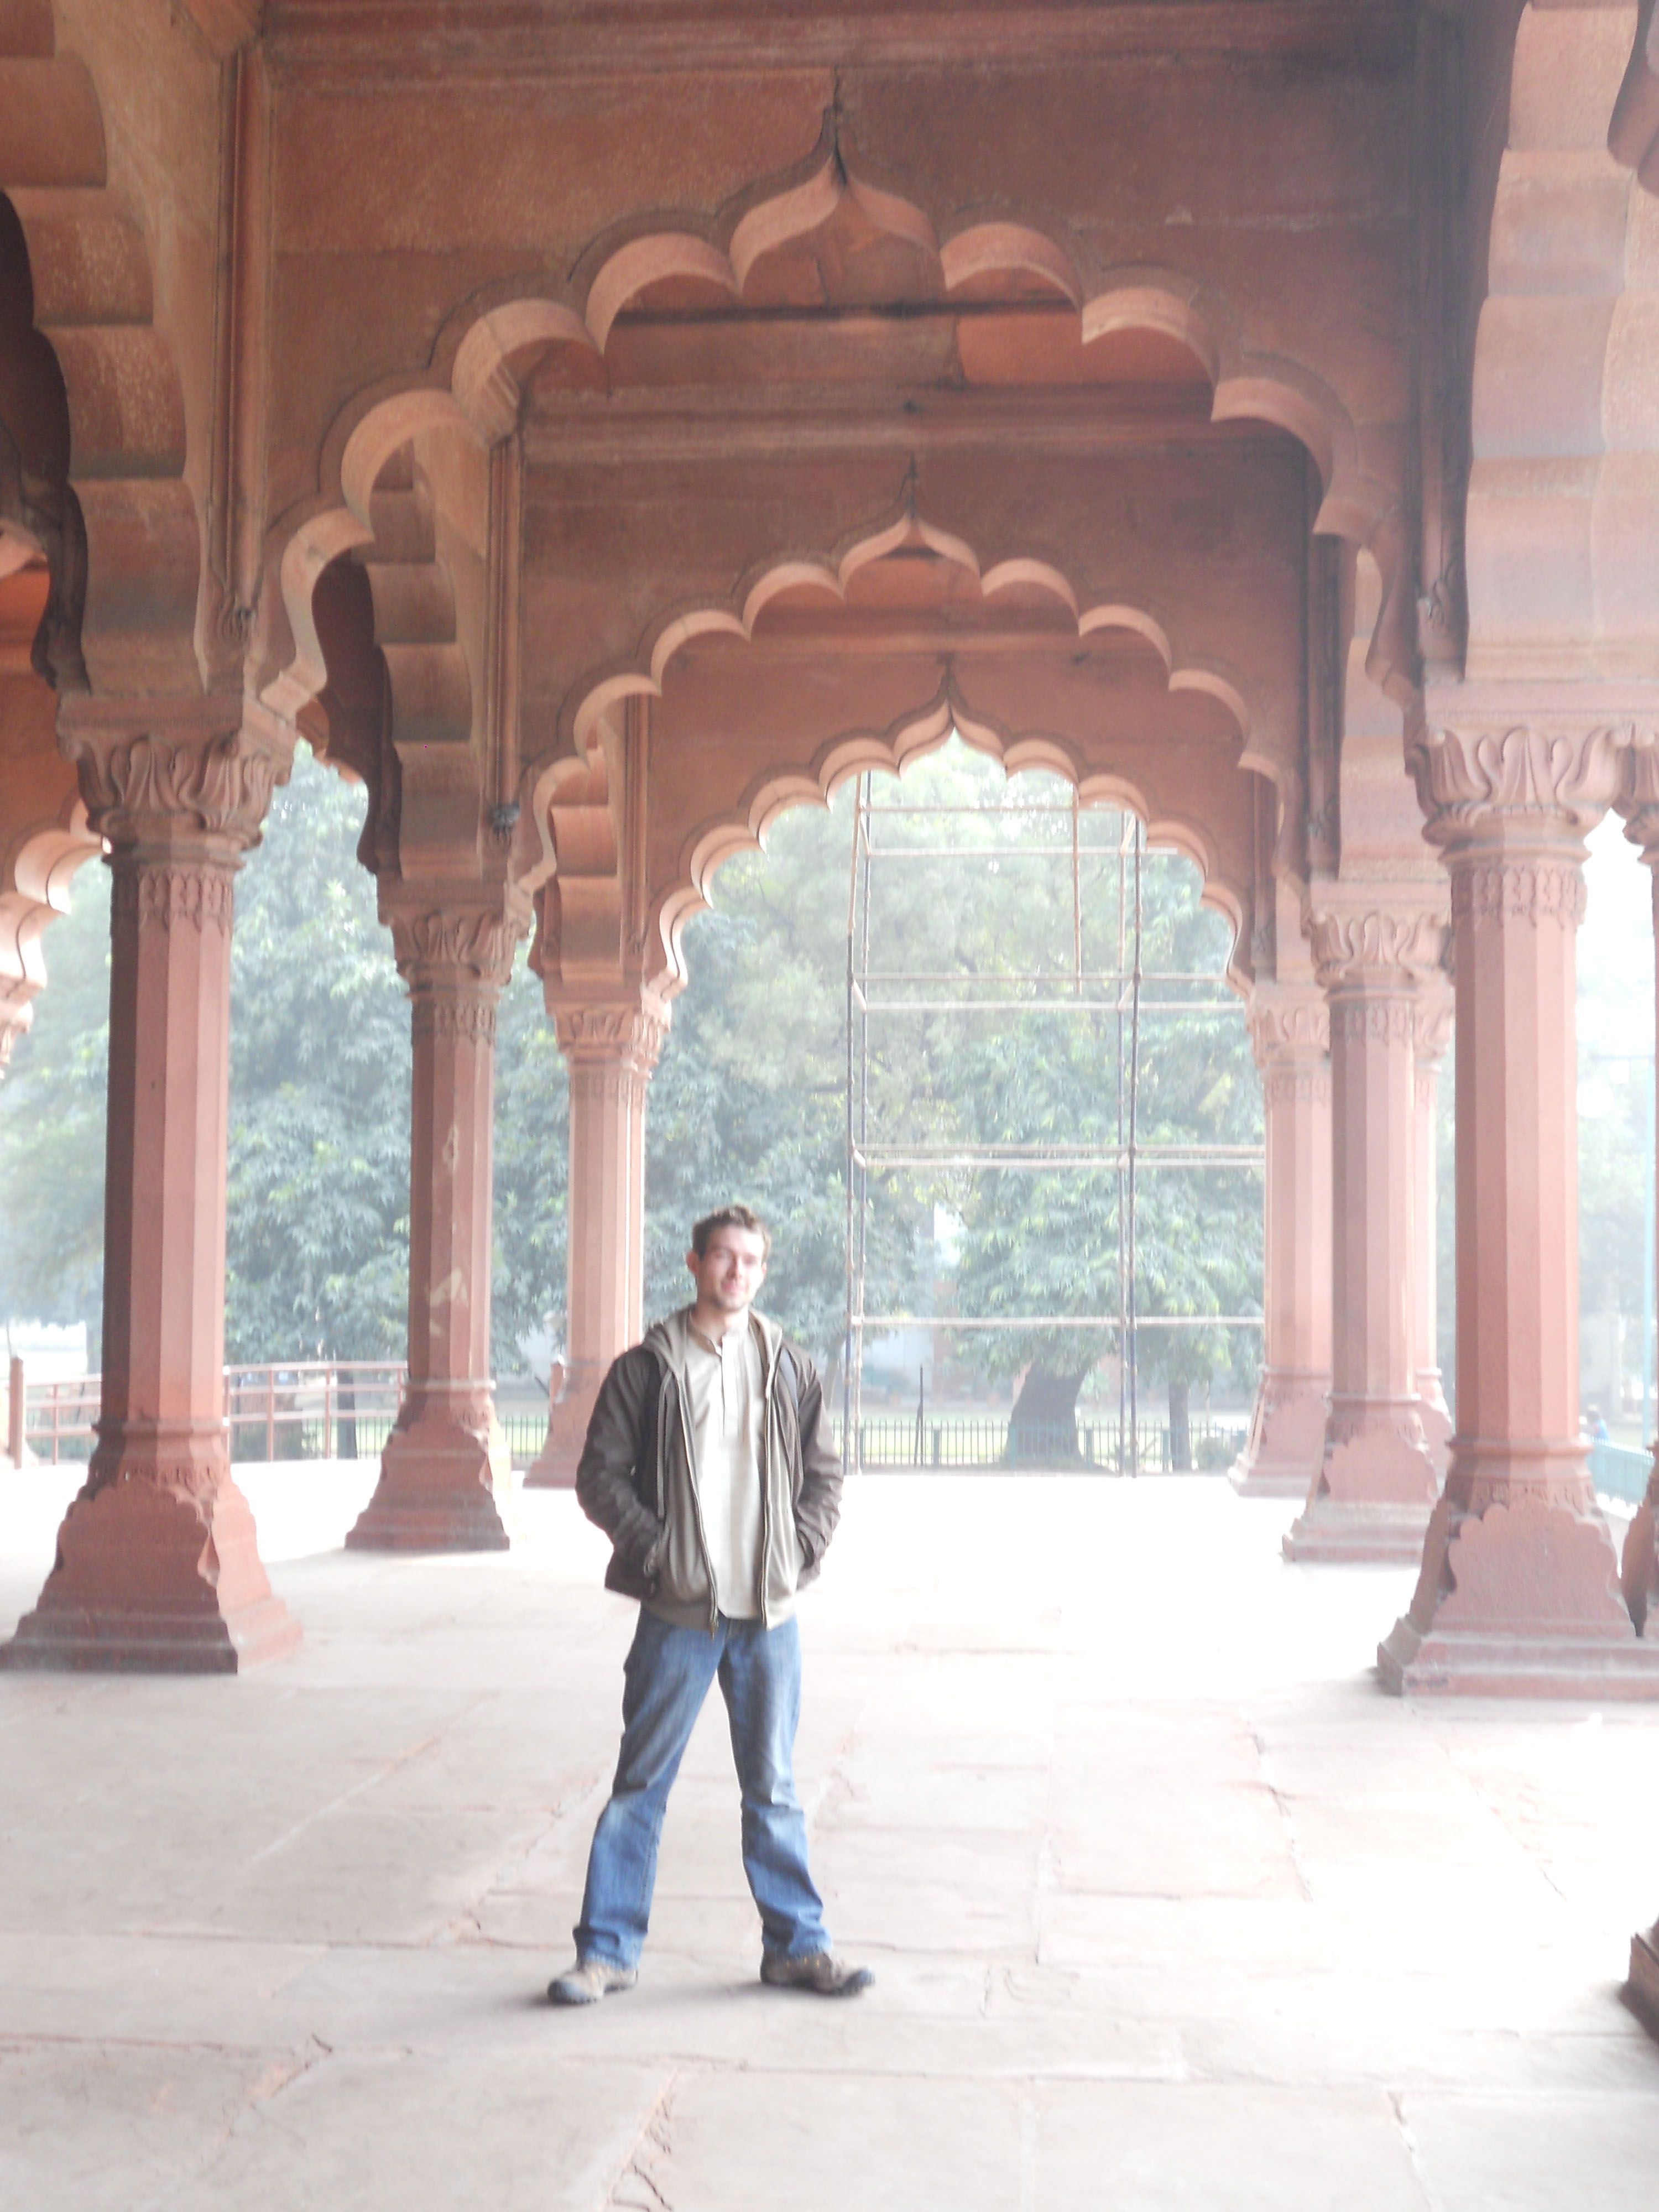 John Vater in an Indian building with elaborate arches